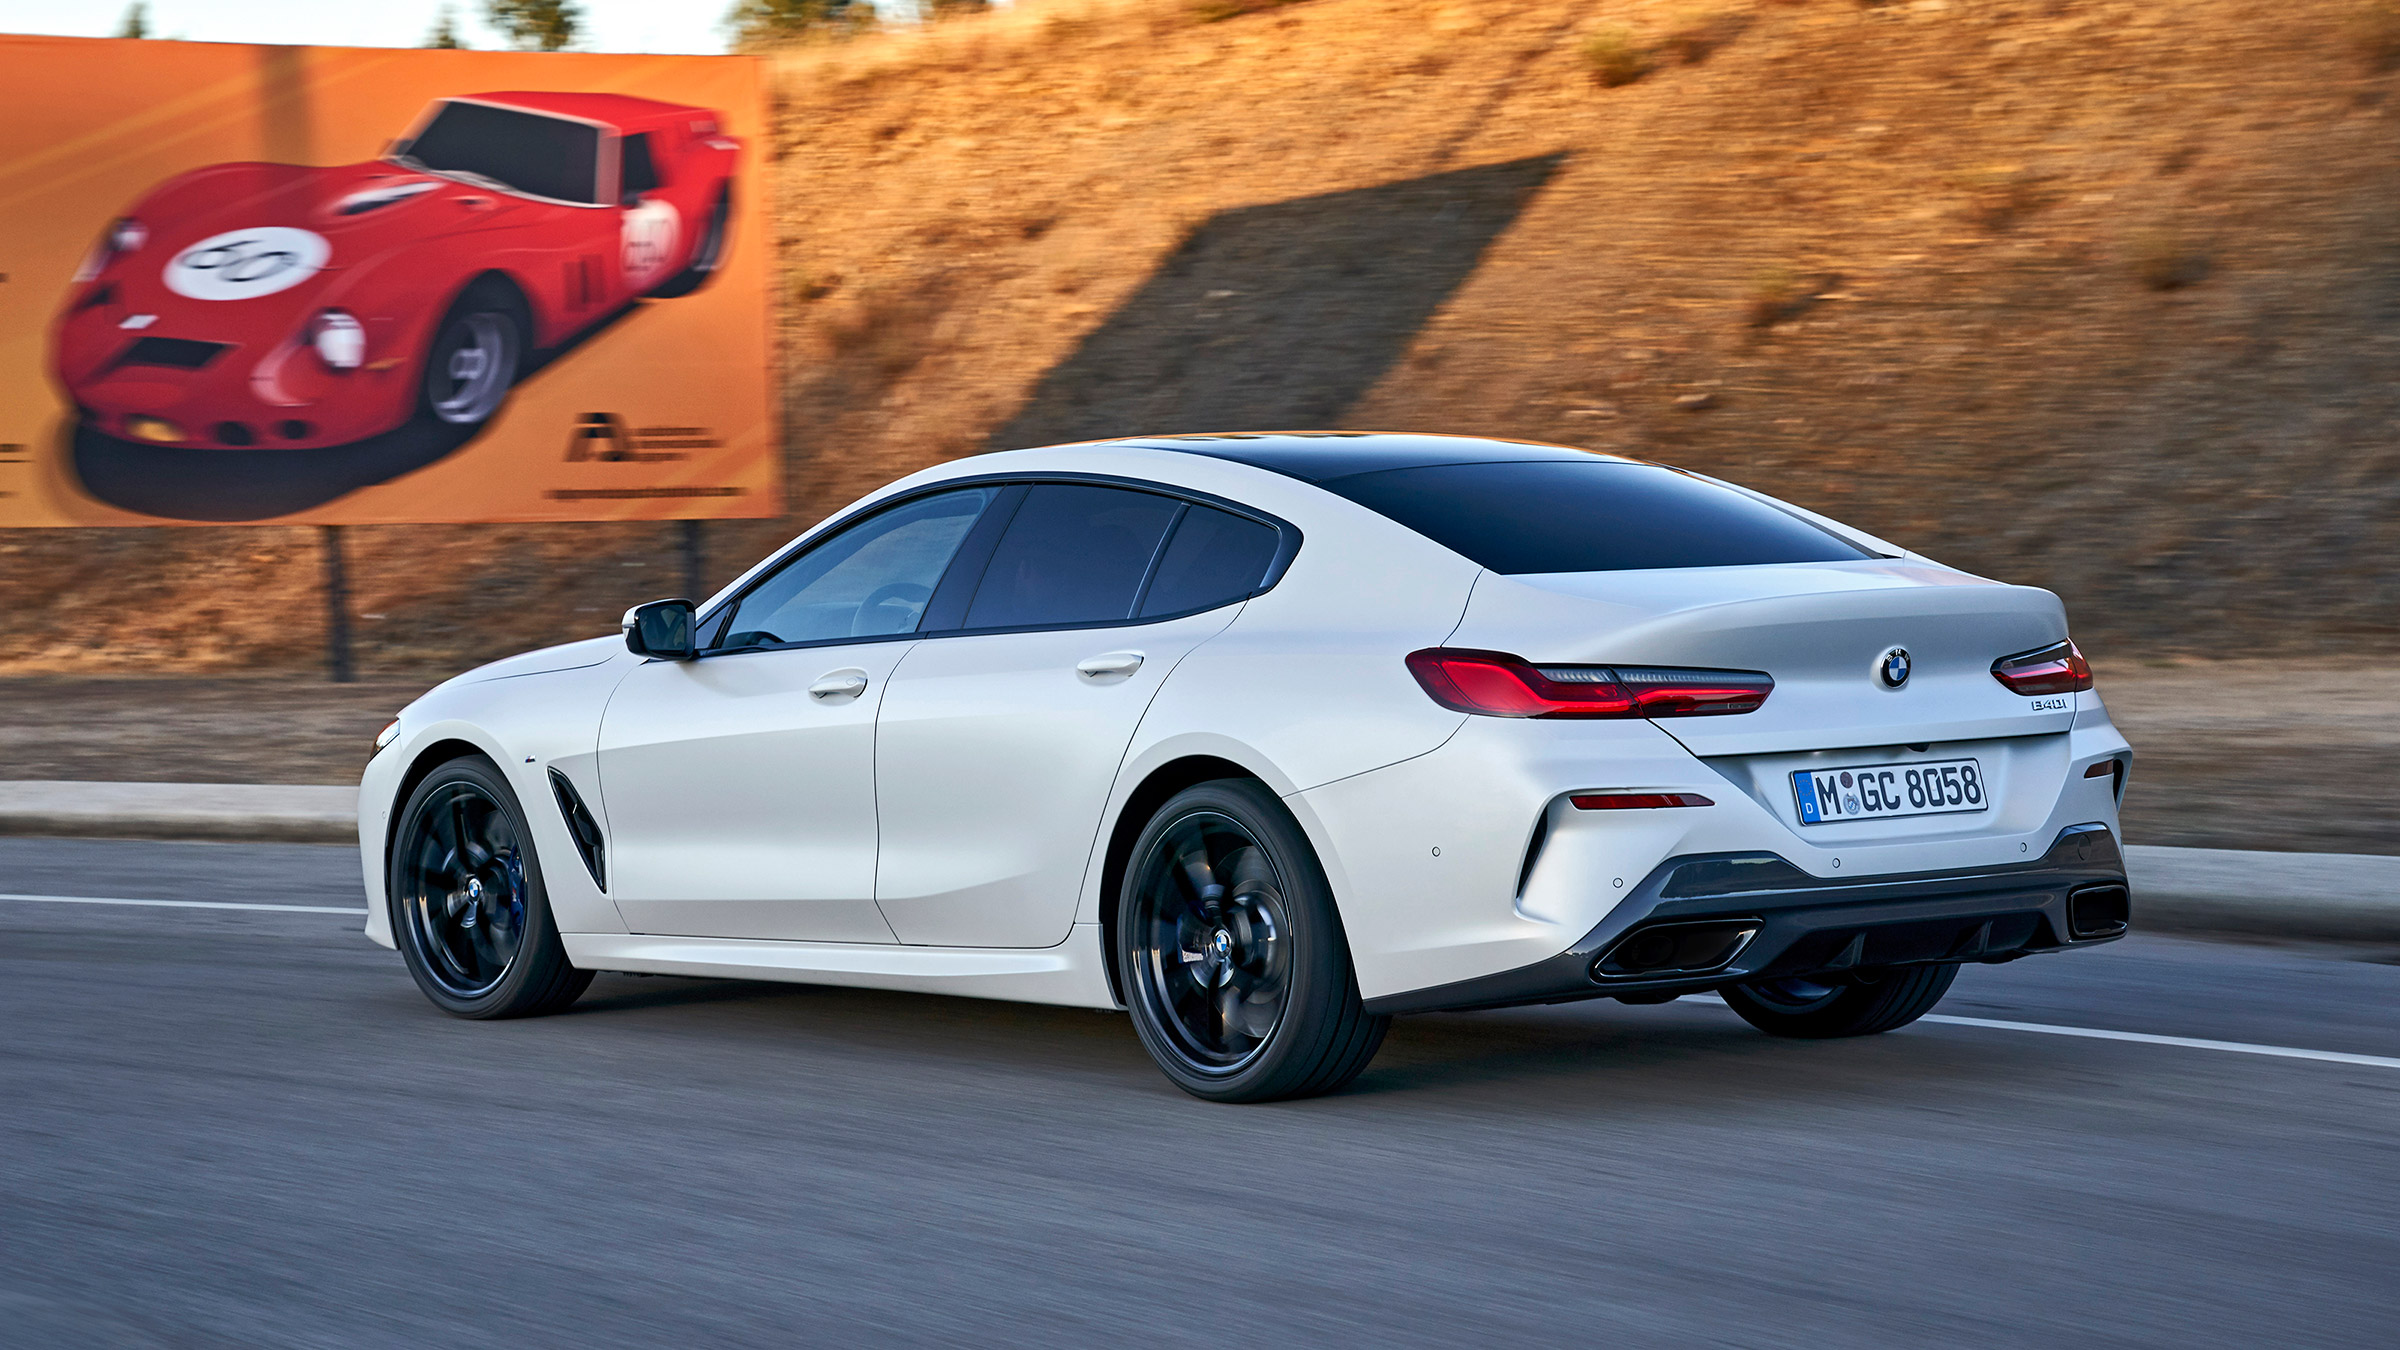 New Bmw 8 Series Gran Coupe Review The 8 Makes More Sense With More Space Evo